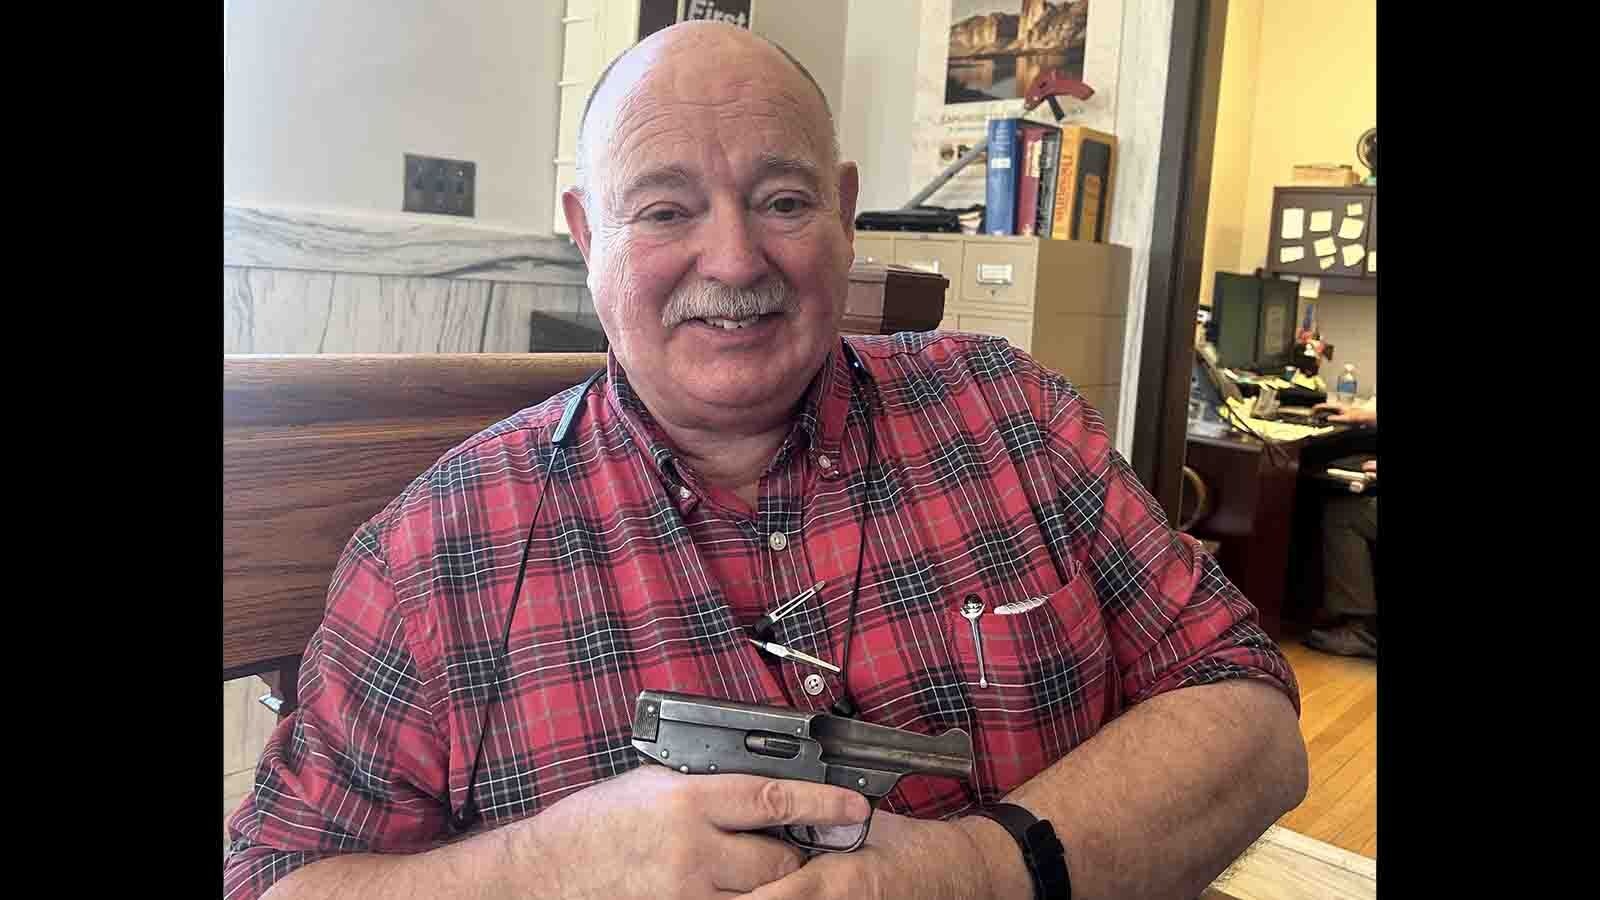 Dick Blust researches vintage firearms for the Sweetwater County Historical Museum in Green River. He's seen here with a rare Warner Infallible, which is so ugly it's endearing and so dangerous it shouldn't be fired.